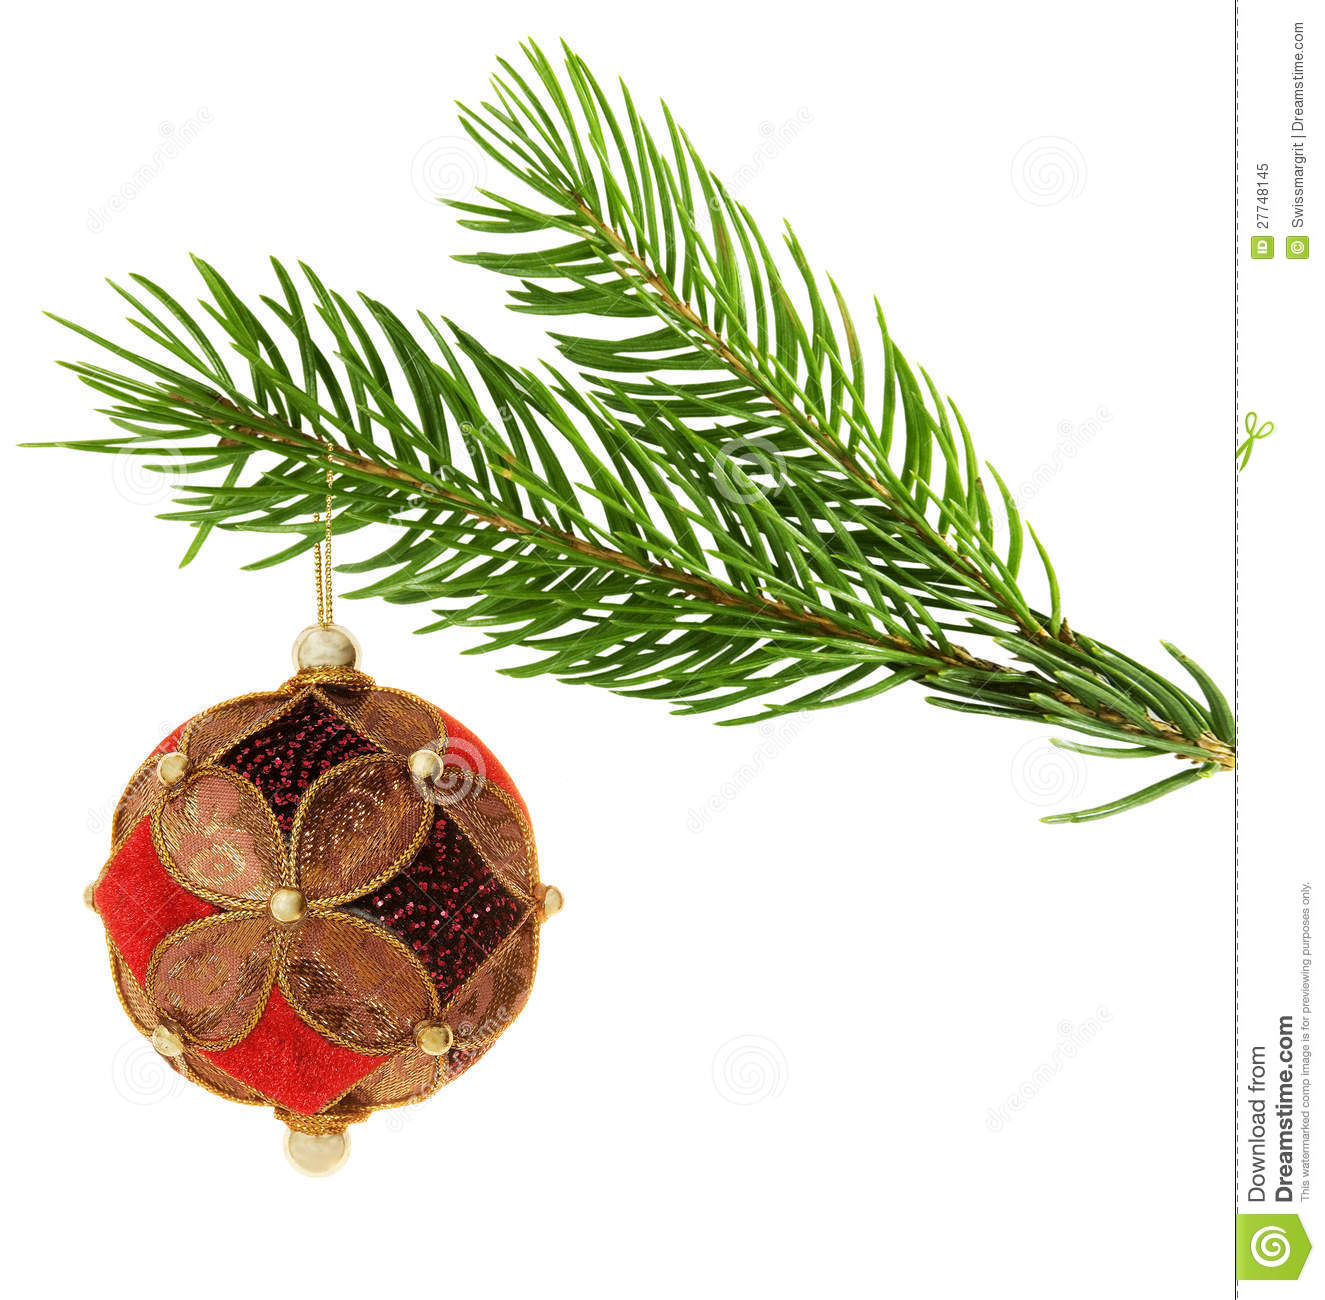 Stock Images Of   Ornate Christmas Ball Hanging On A Pine Branch